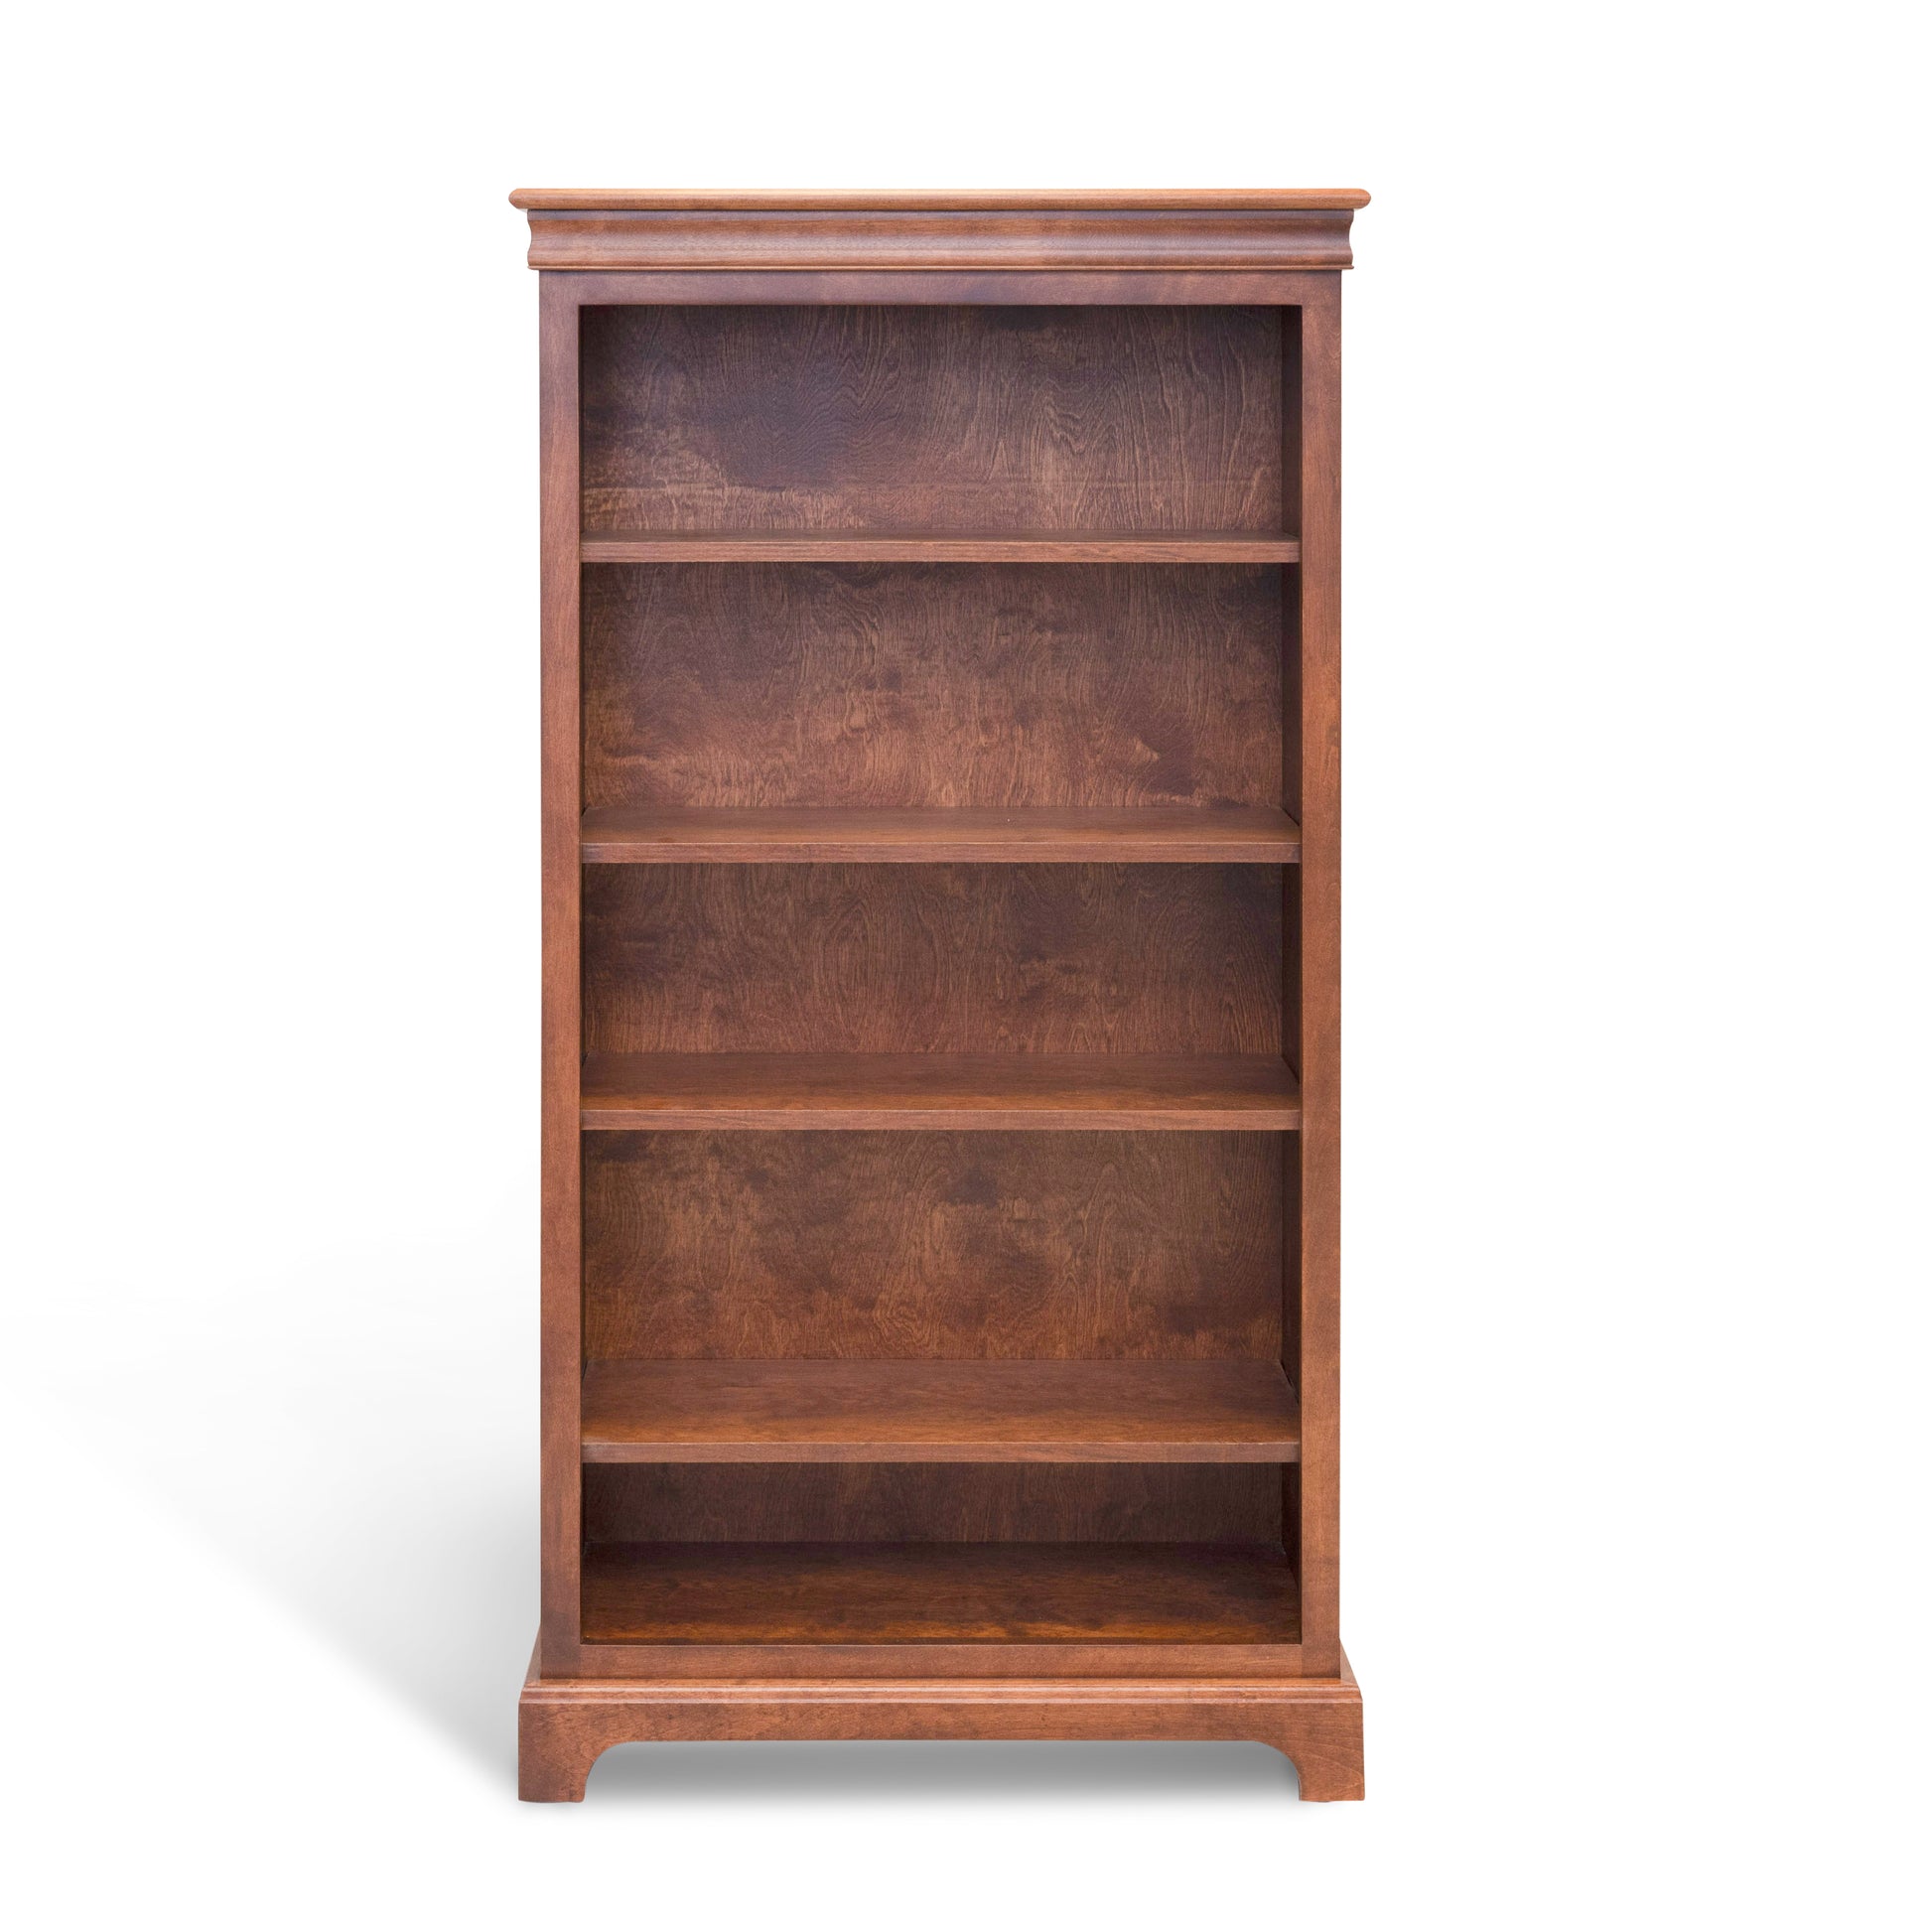 Acadia Madison Bookcase is built in birch and is 12 inches deep, featuring adjustable shelving and crown moulding. Shown in Walnut finish with empty shelves.